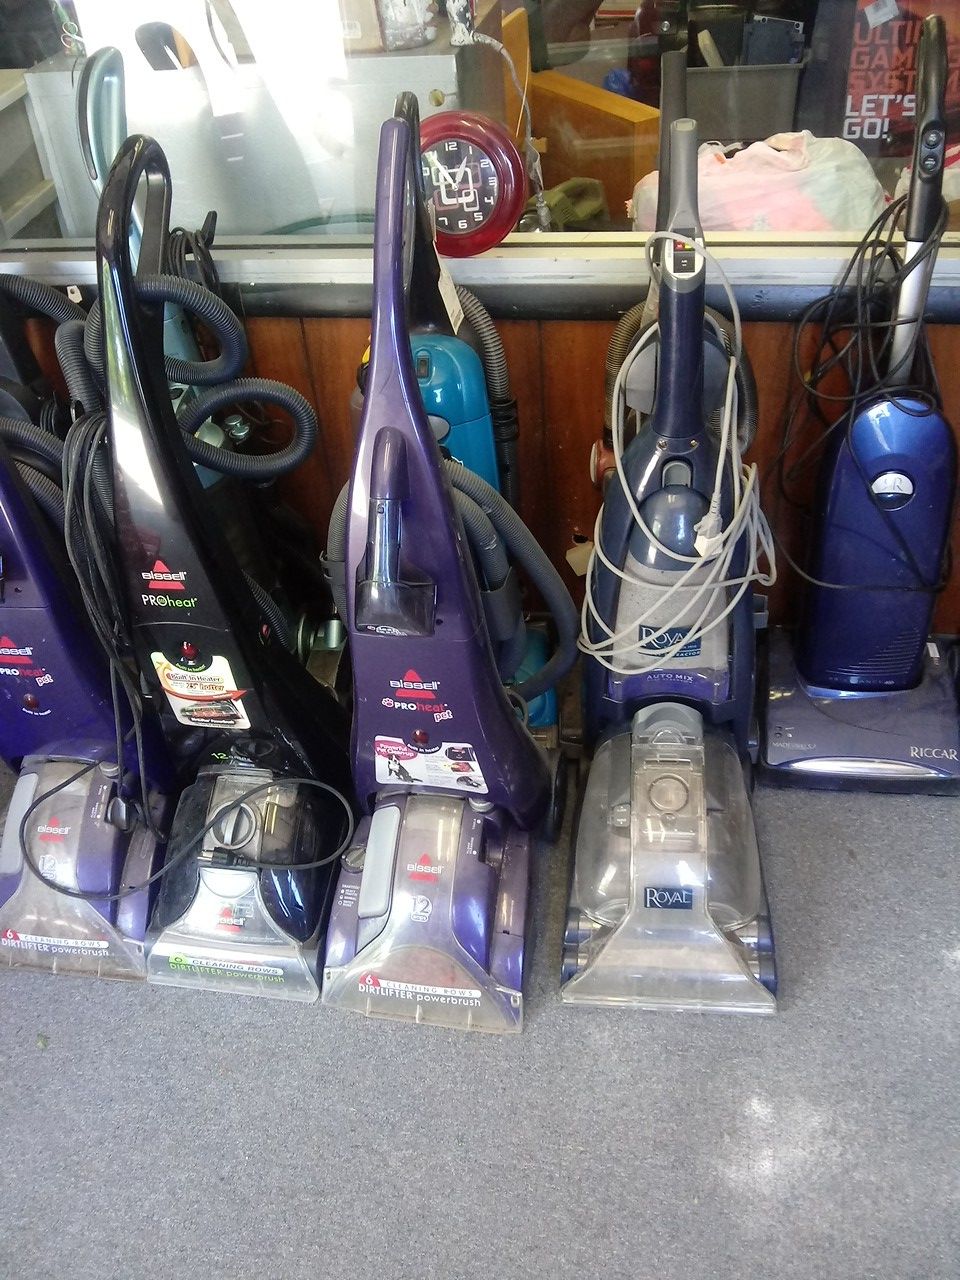 Carpet cleaners and vacuums